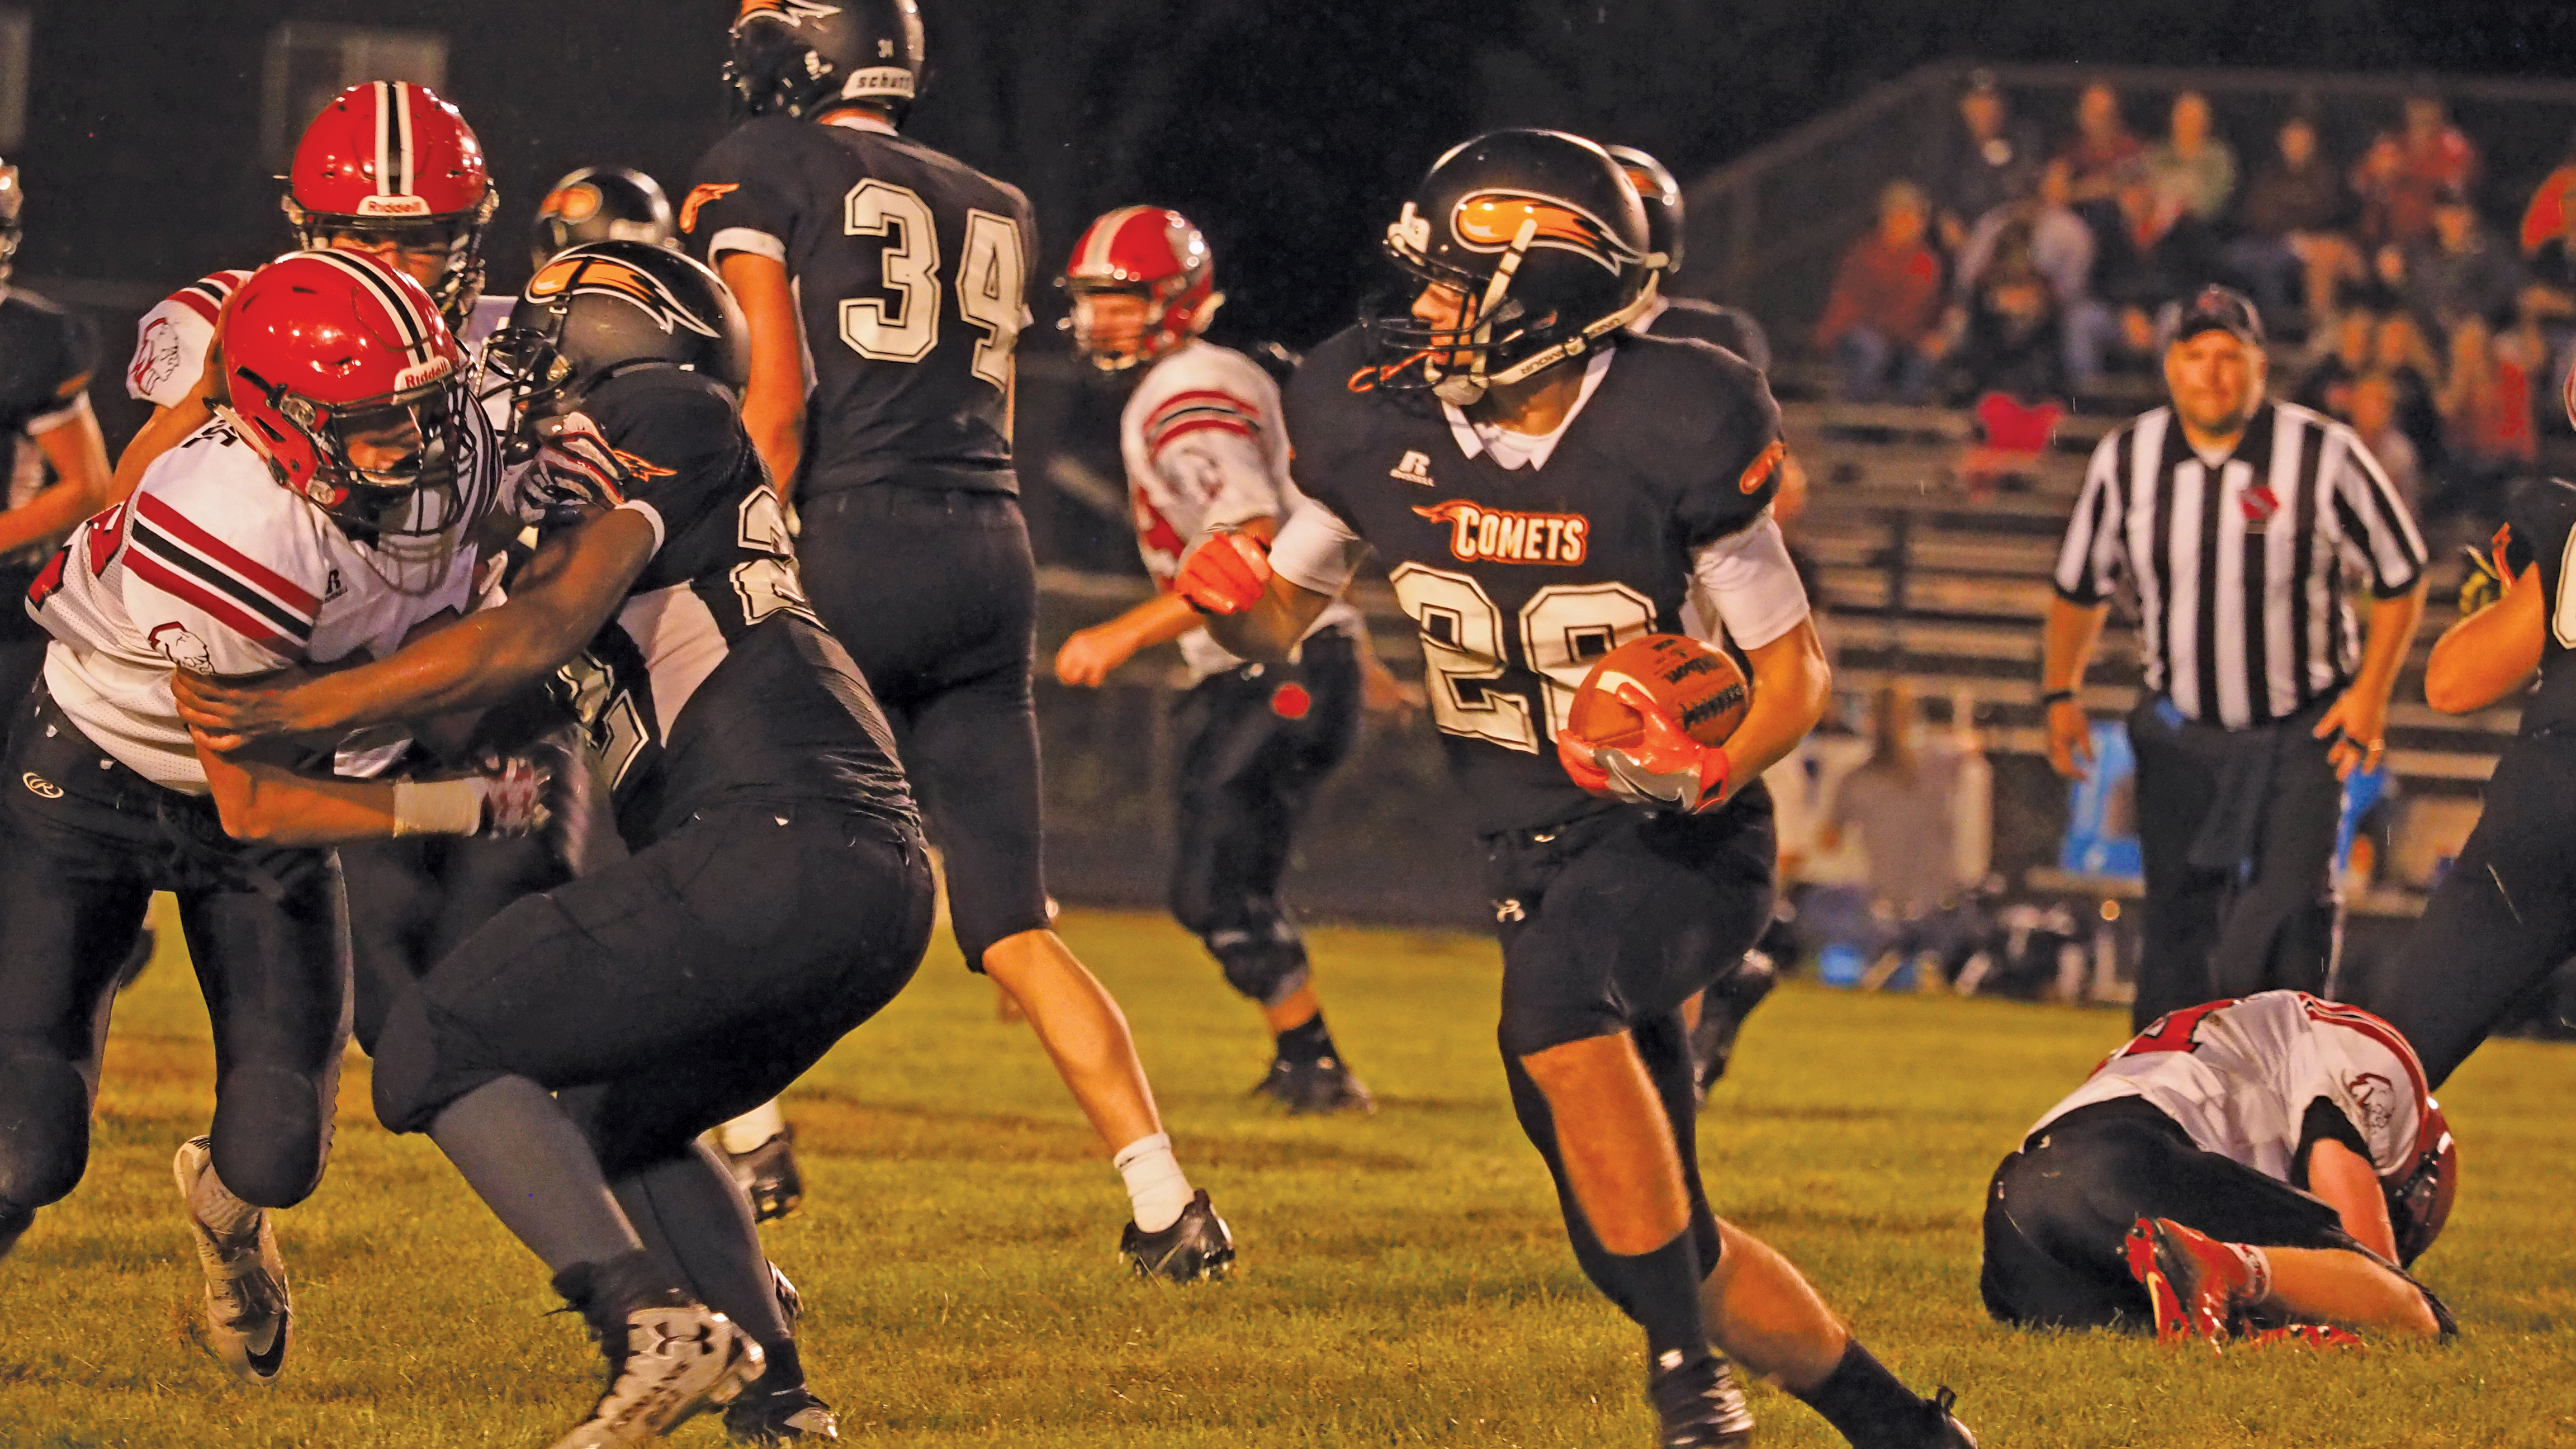 Comets lose to Chickasaws, 35-12